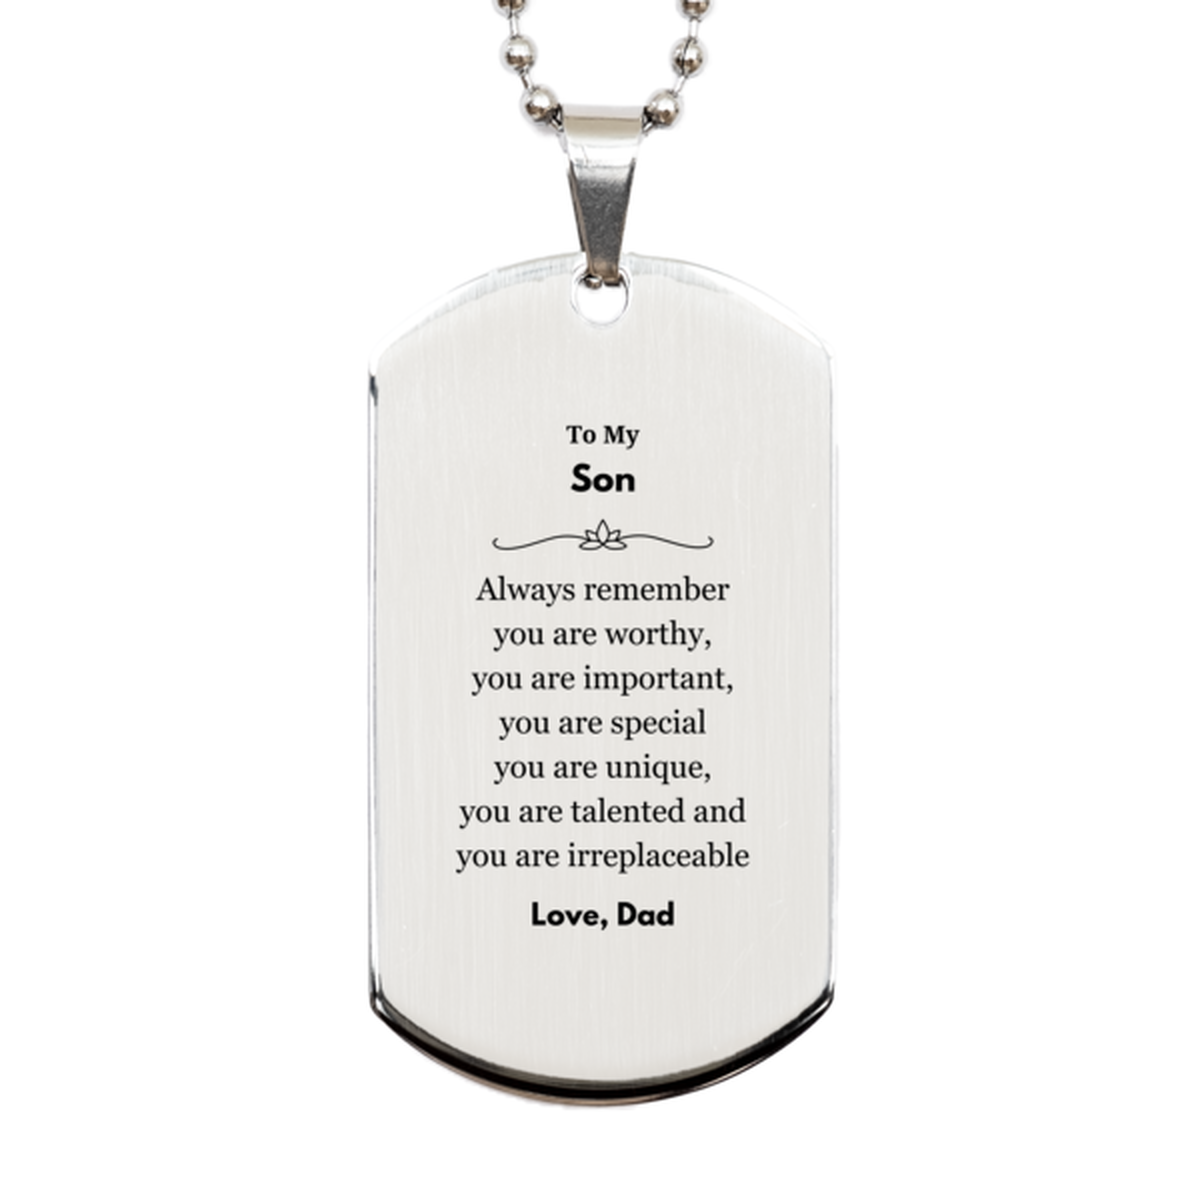 Son Birthday Gifts from Dad, Inspirational Silver Dog Tag for Son Christmas Graduation Gifts for Son Always remember you are worthy, you are important. Love, Dad